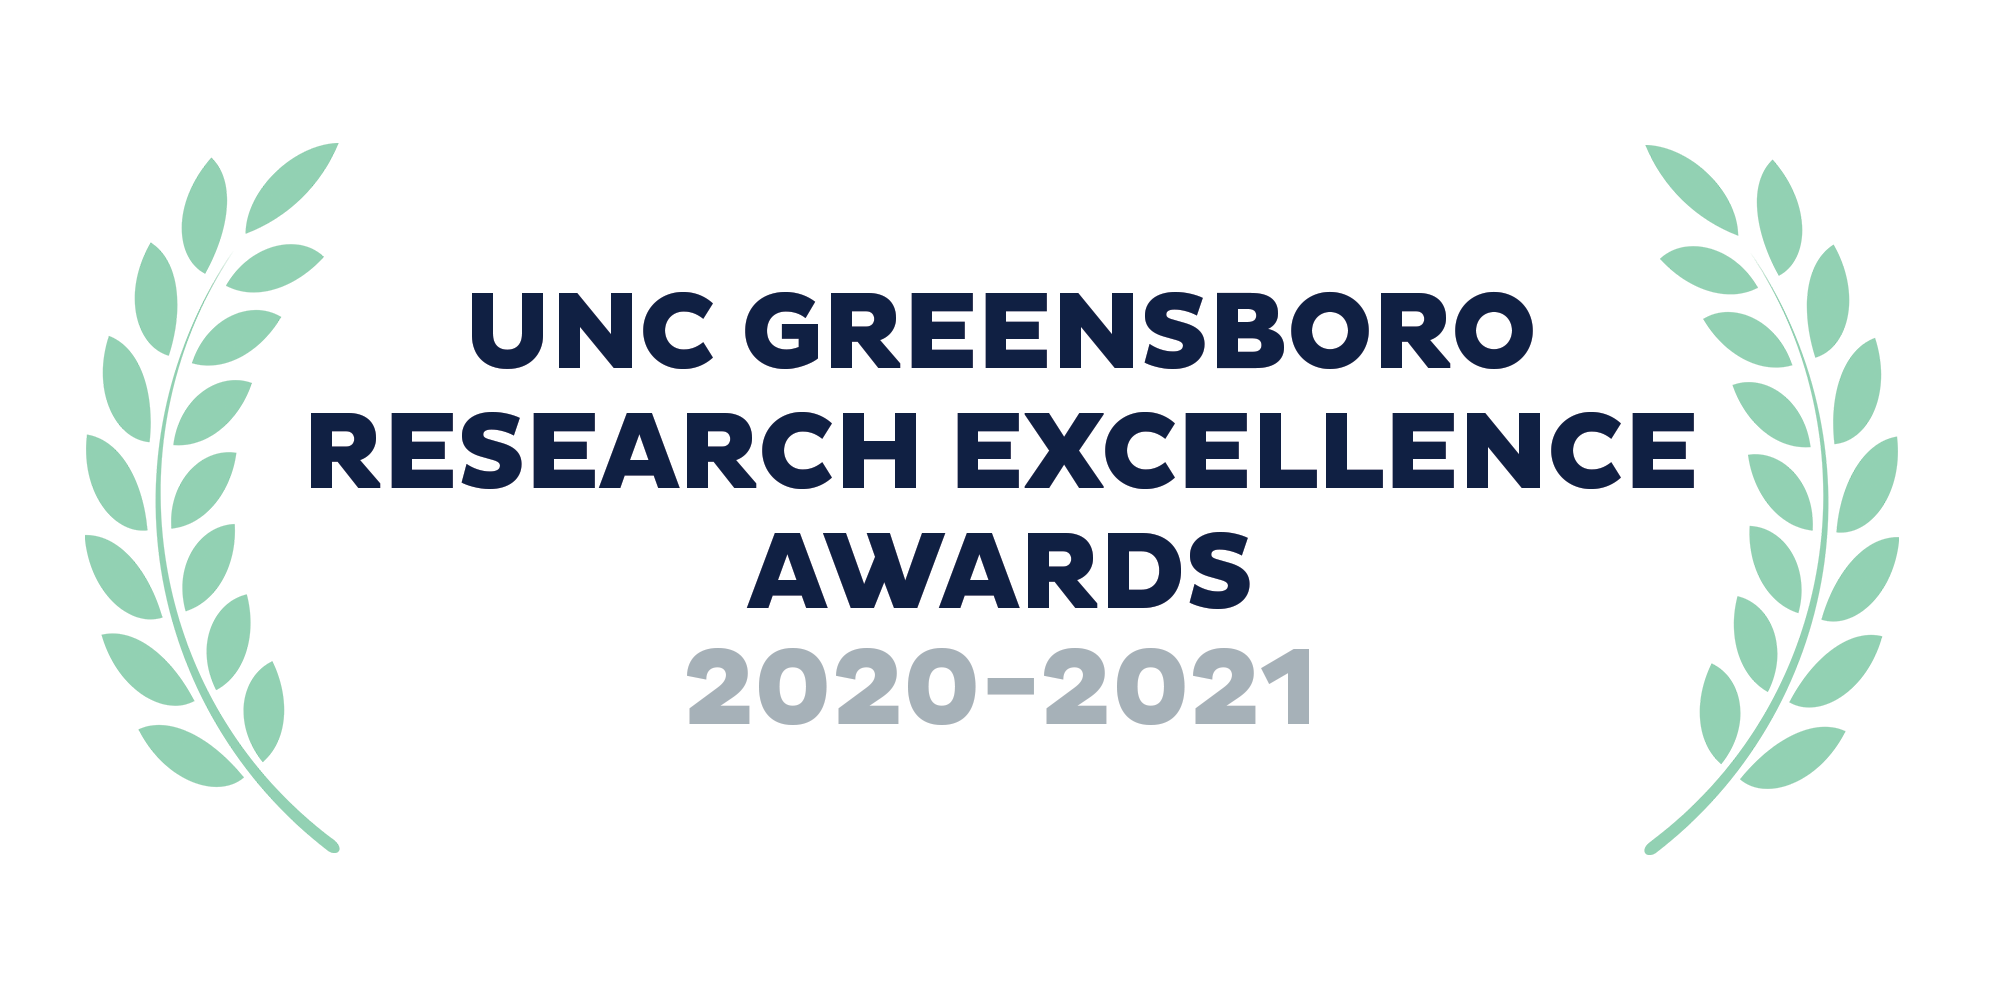 UNCG Research Excellence Awards 2020-2021